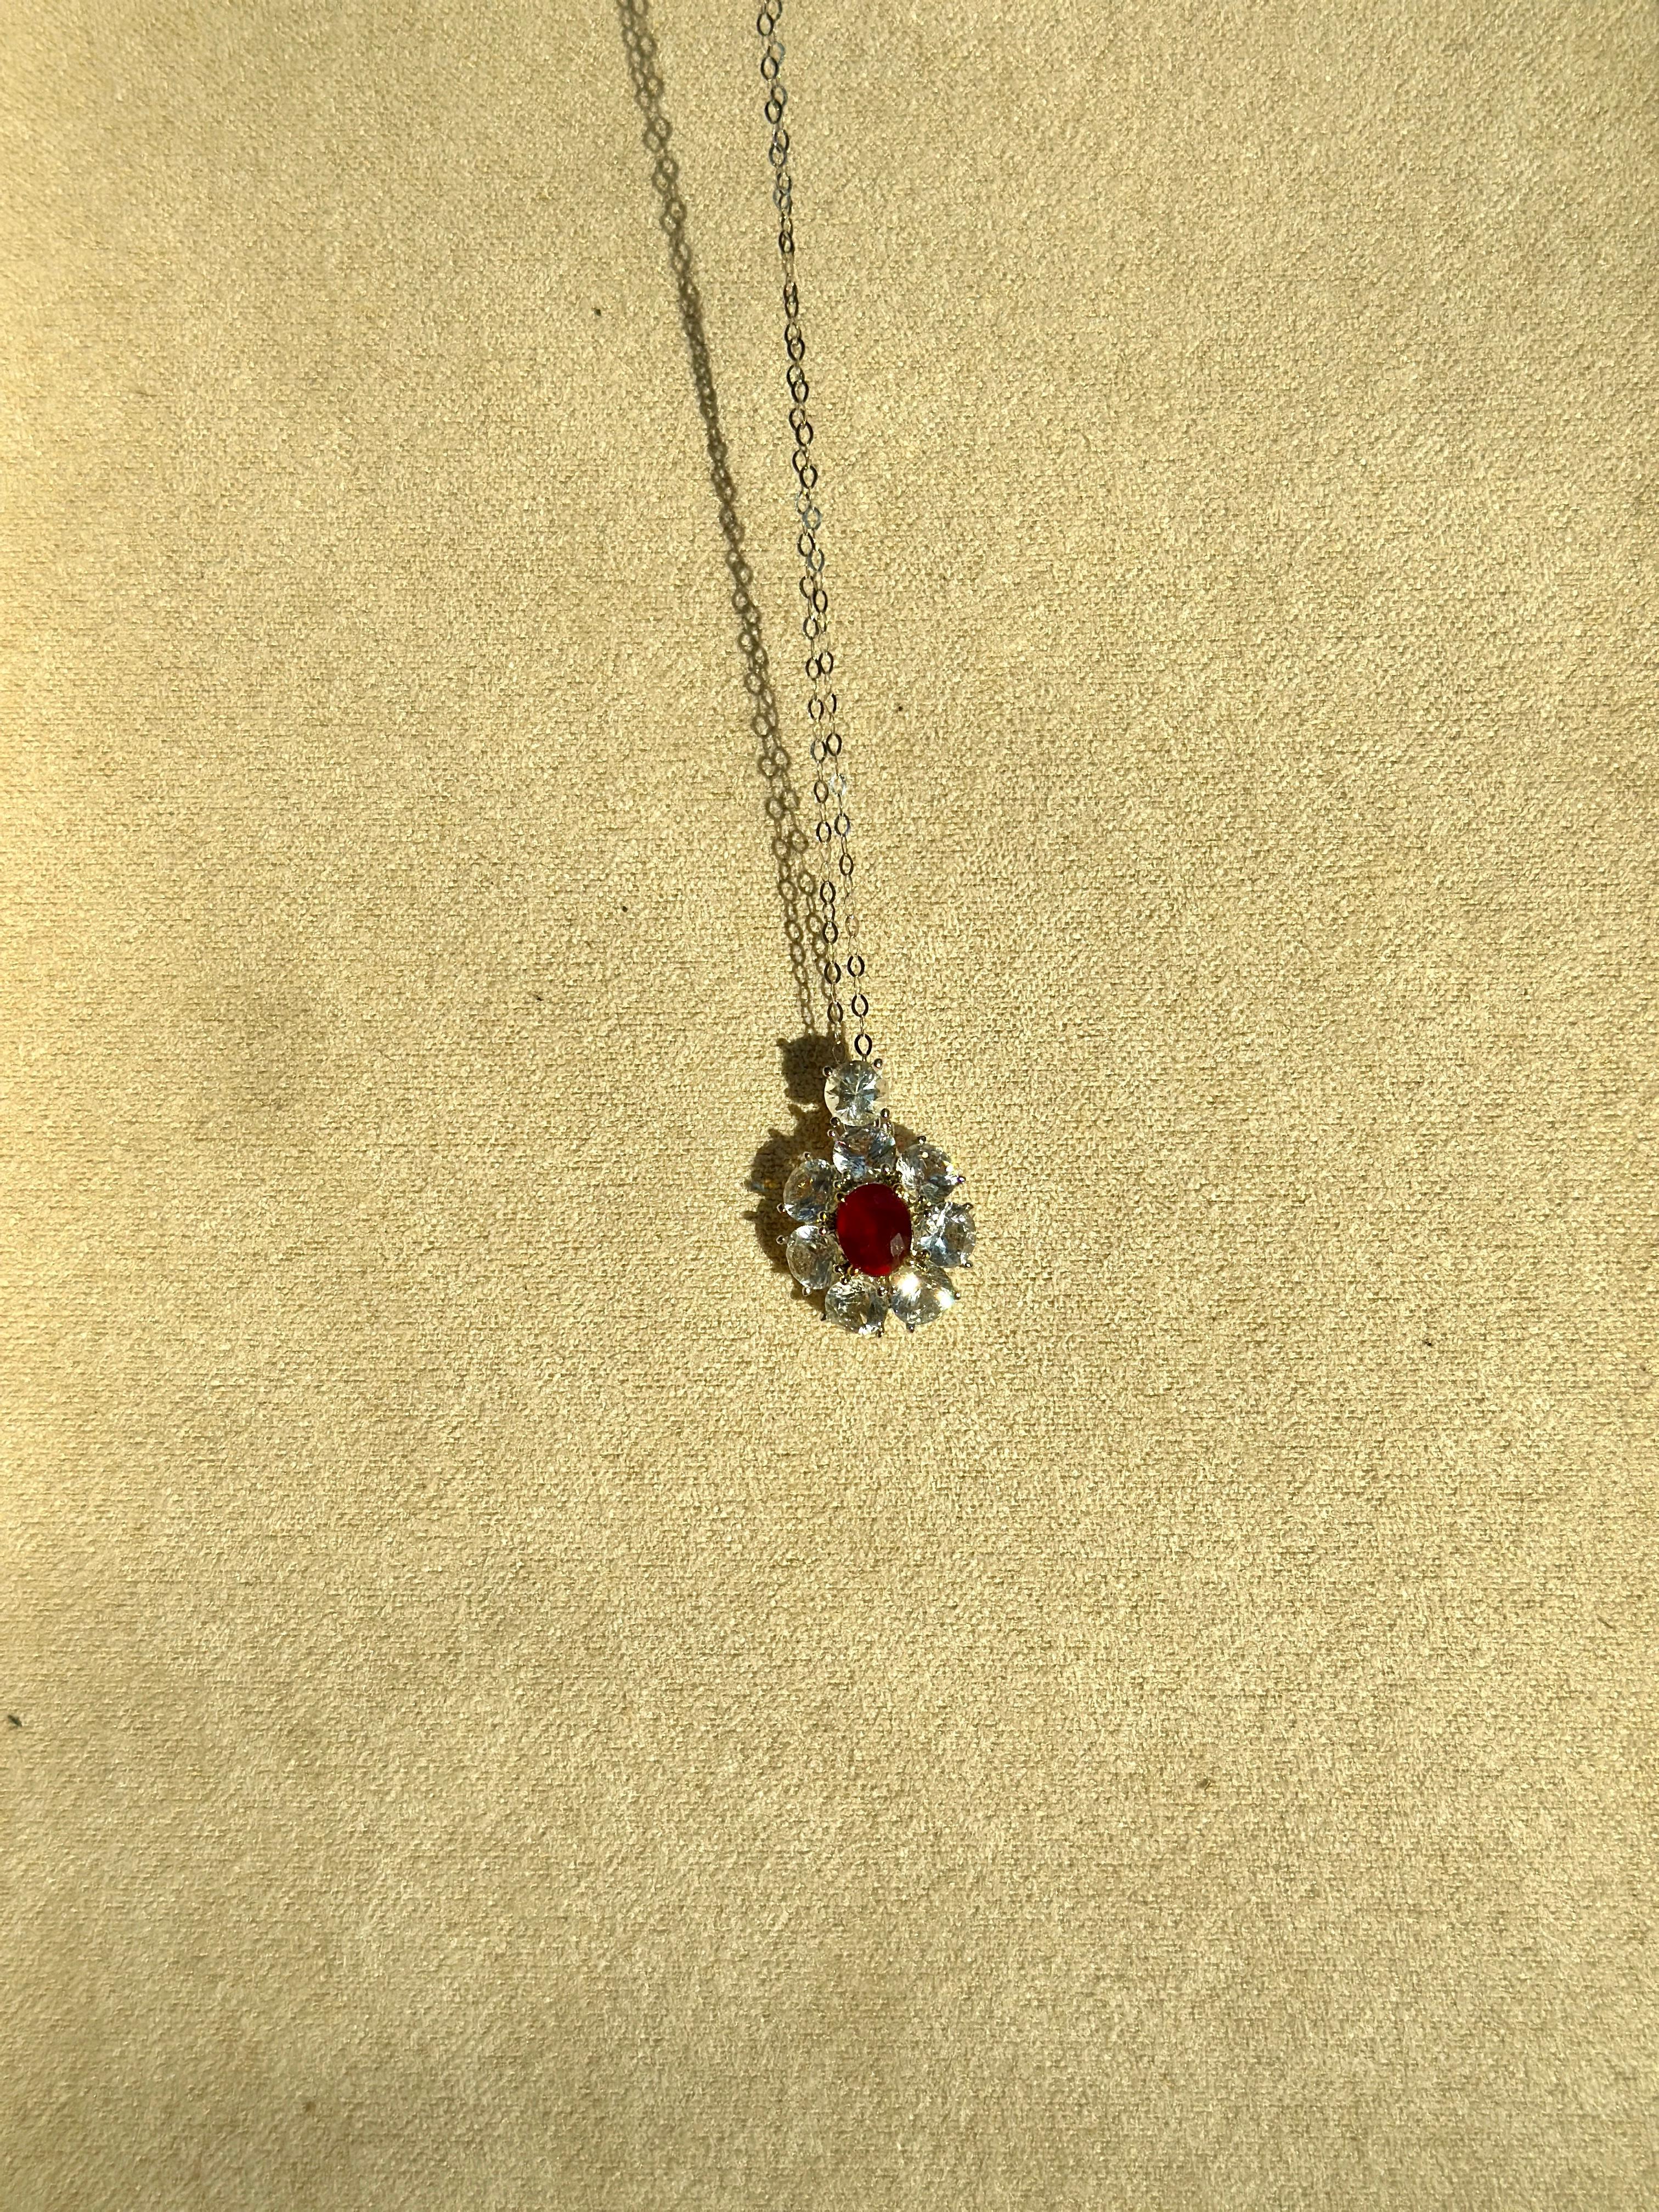 Classical Roman Ruby and White Sapphire Pendant Necklace 18k Gold with Adjustable Chain